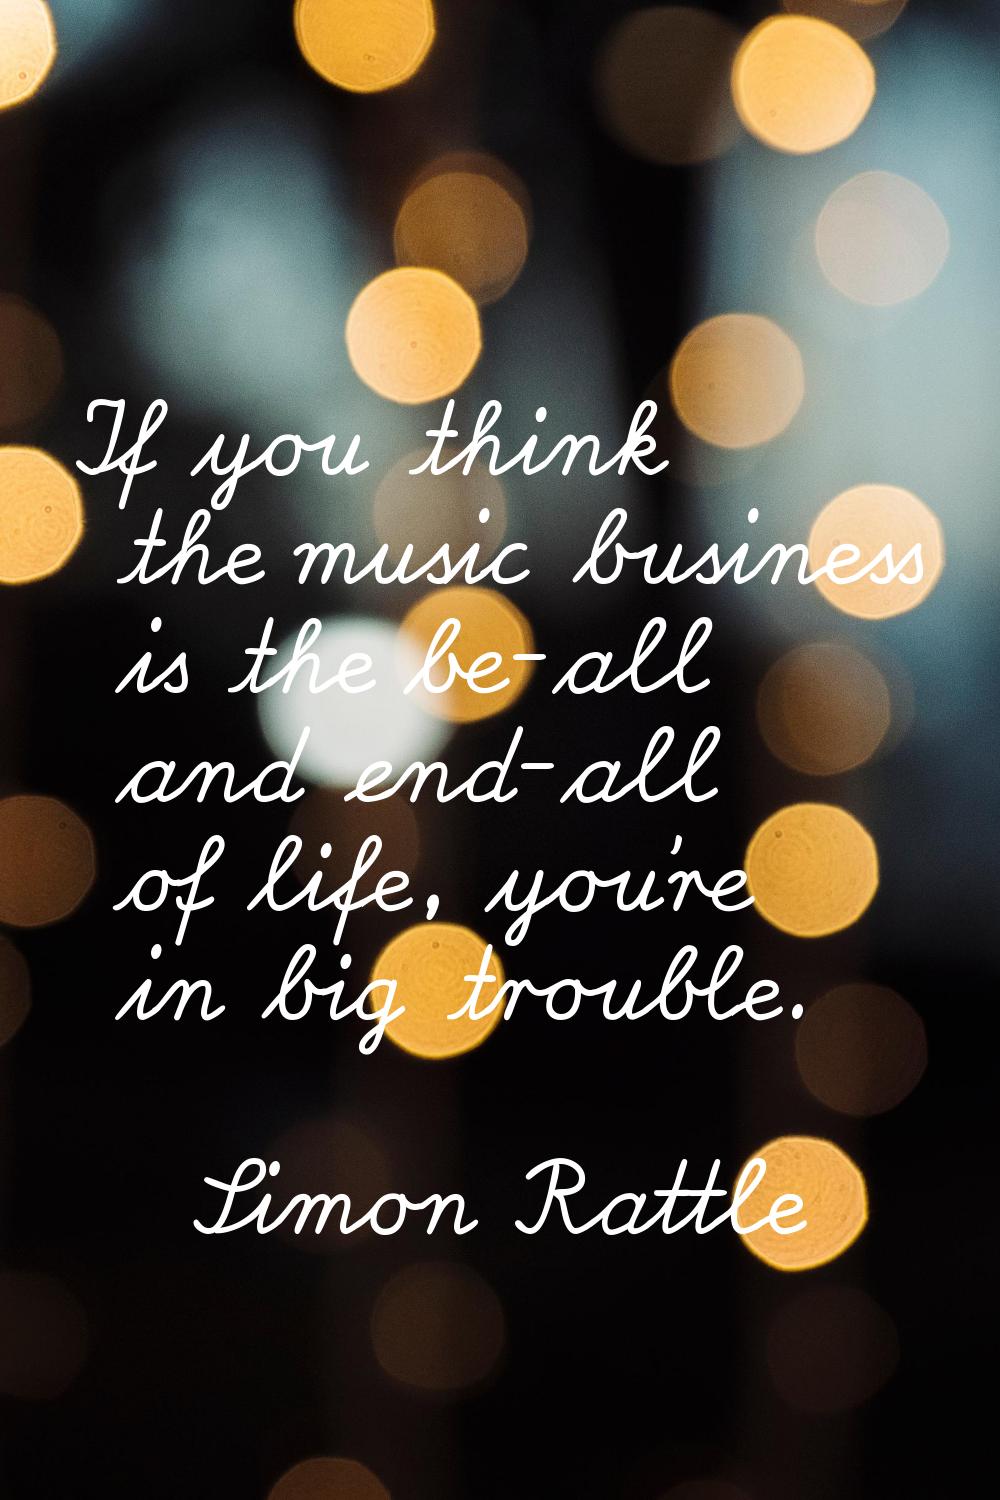 If you think the music business is the be-all and end-all of life, you're in big trouble.